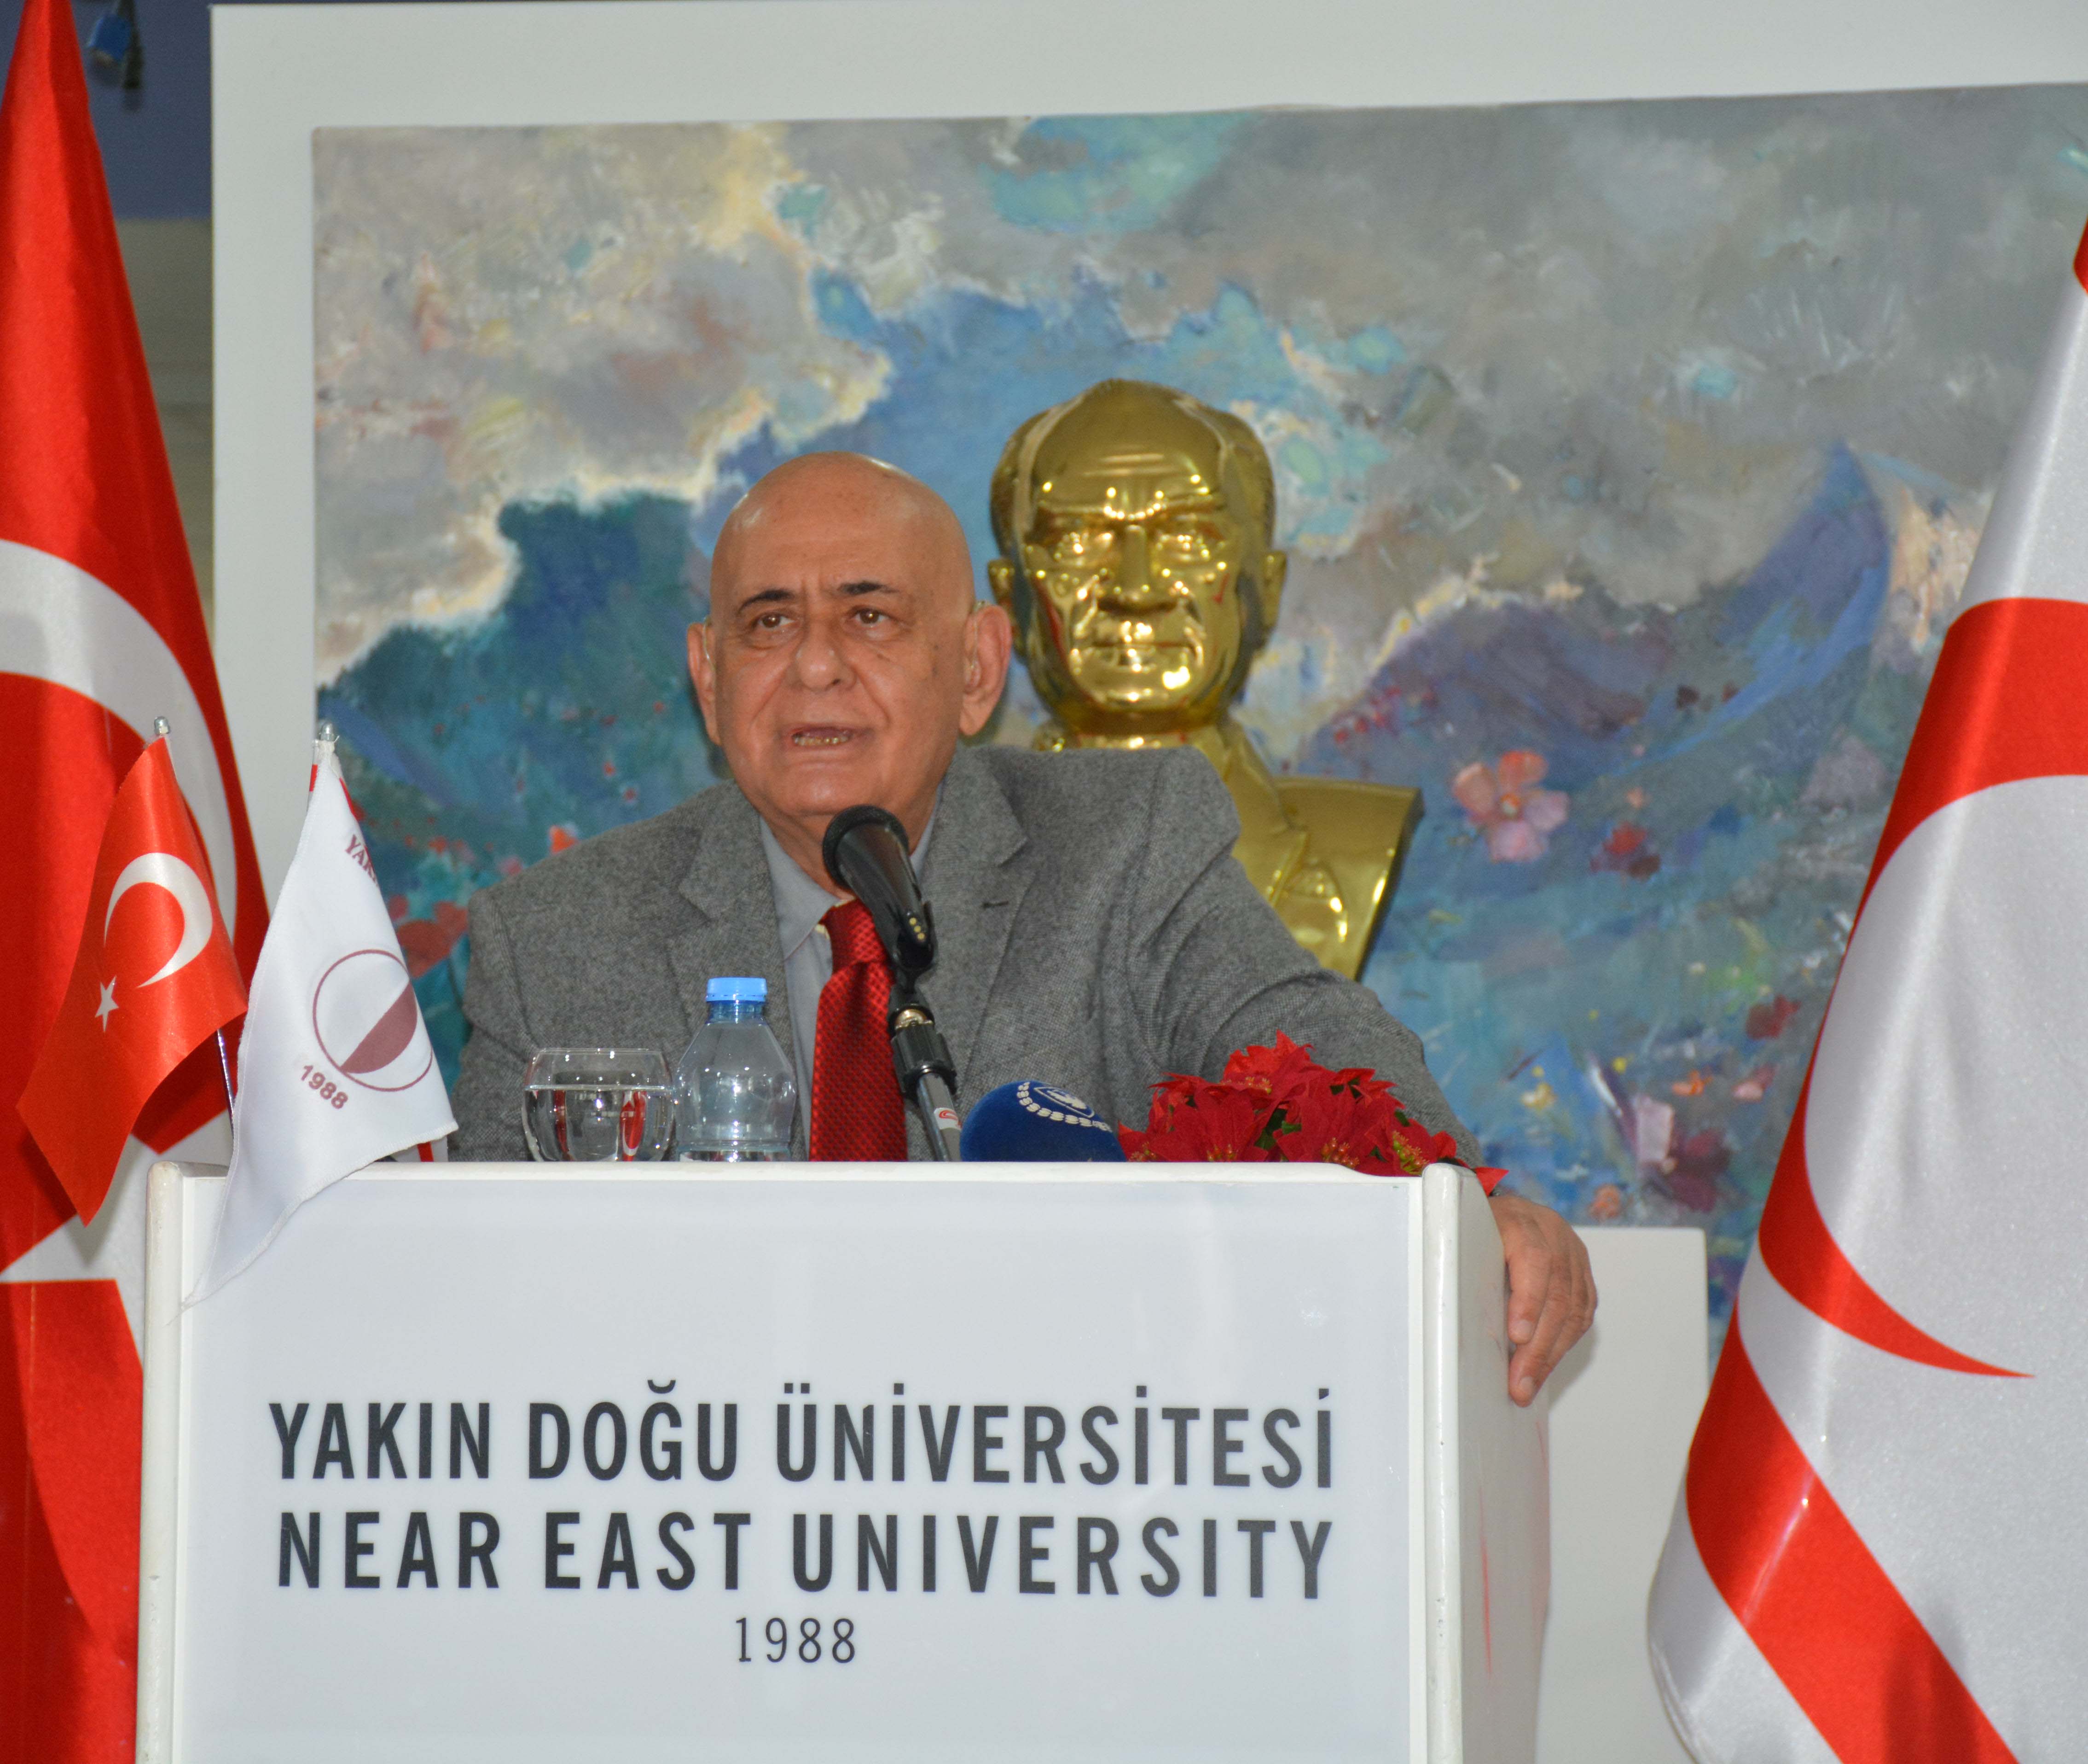 Featuring 142 works of 61 Artists, the Exhibition titled “To Exist with Art “, which was organized by the Cyprus Museum of Modern Arts in Memory of the Tenth Death Anniversary of the Pioneer Turkish Cypriot Painter Ismet Vehit Güney, was opened by the Prime Minister Tufan Erhürman